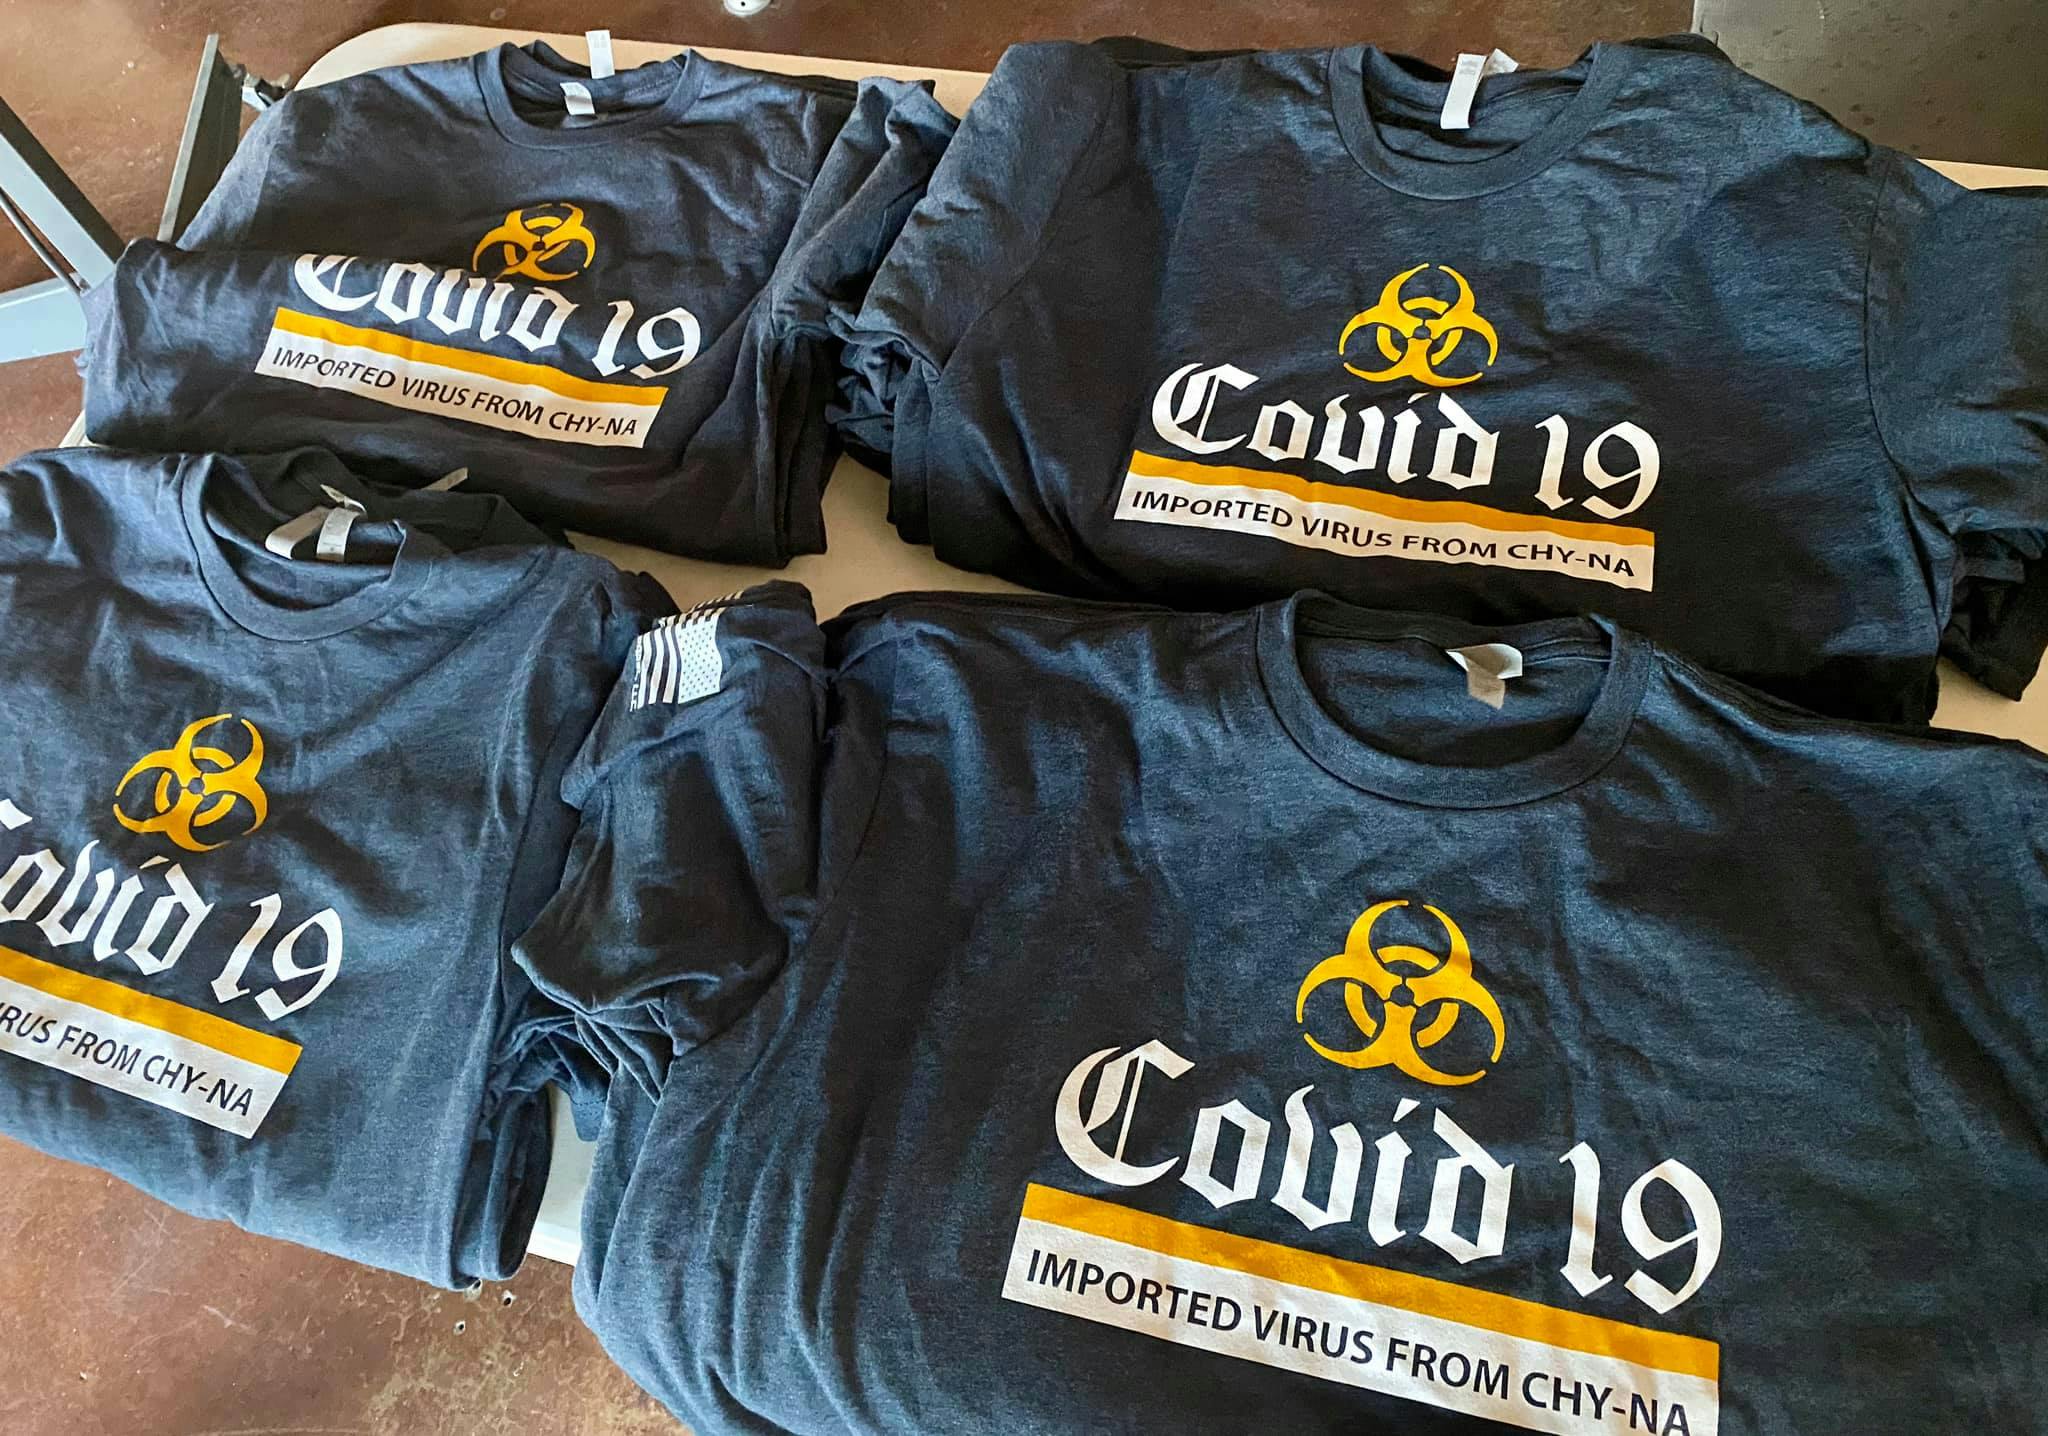 Georgia sheriff who defended spa shooter shares racist COVID 19 shirt